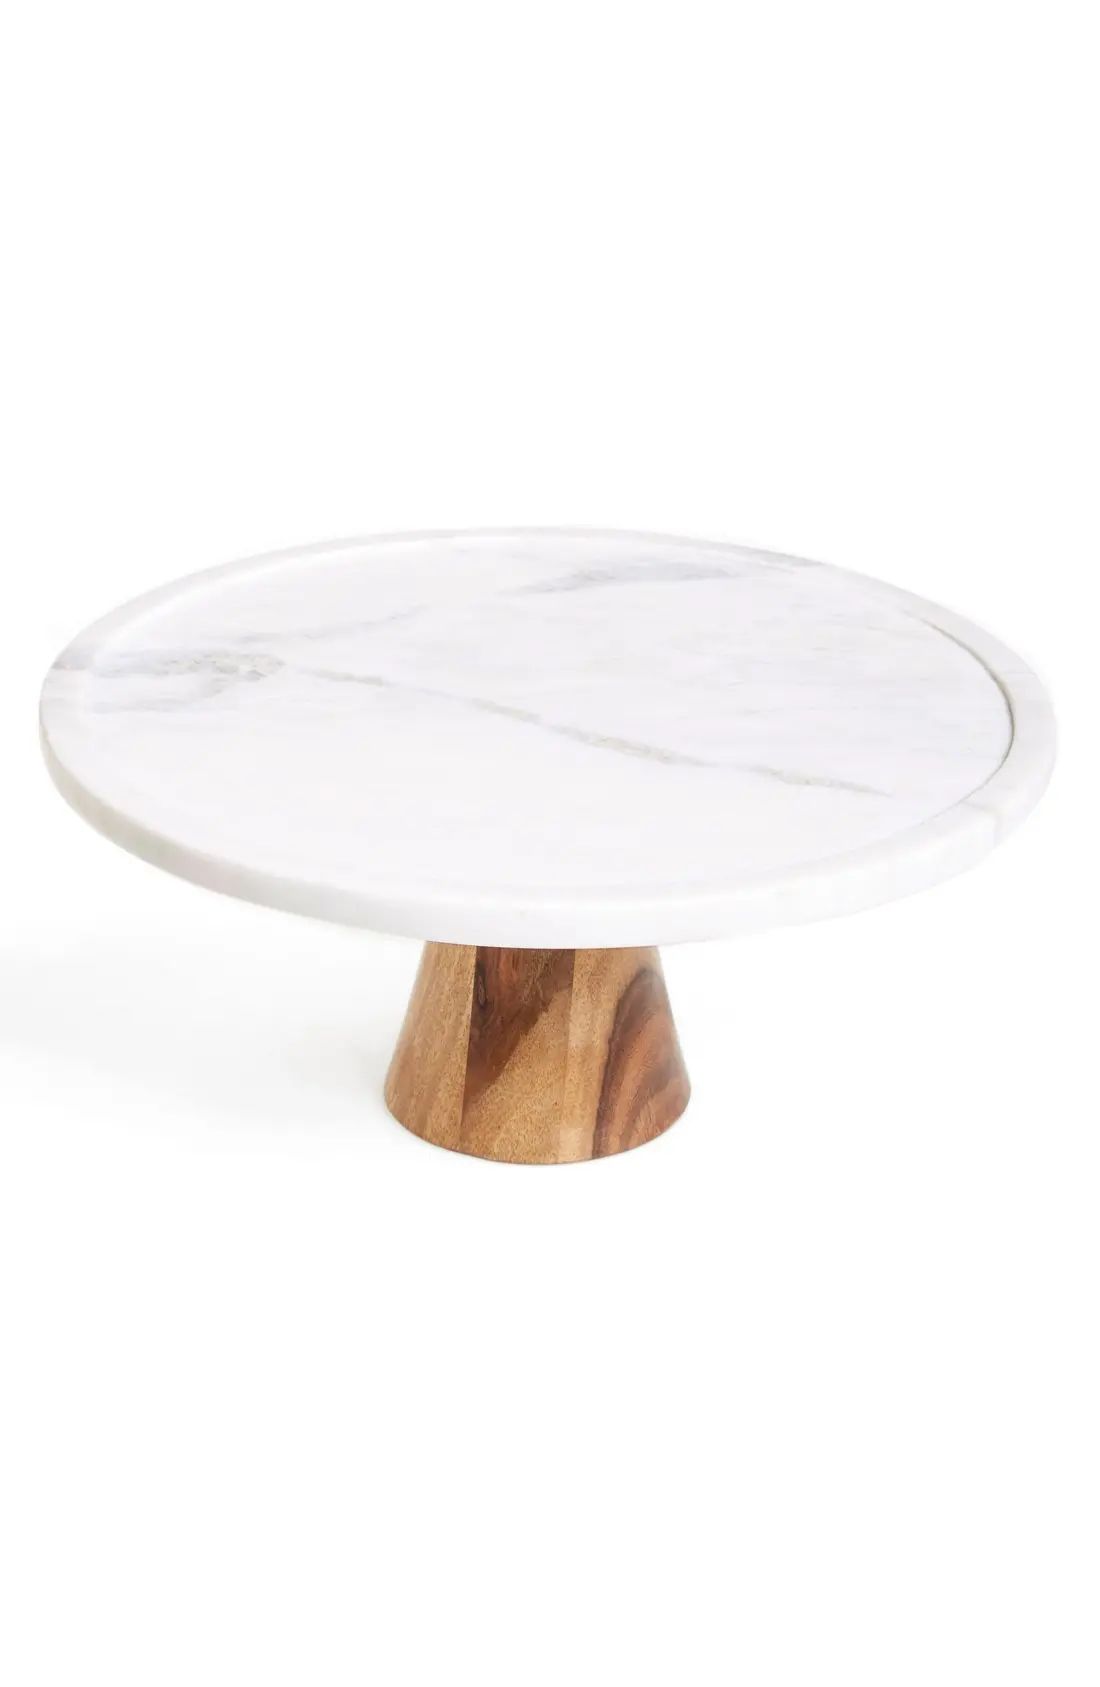 Marble & Wood Cake Stand | Nordstrom